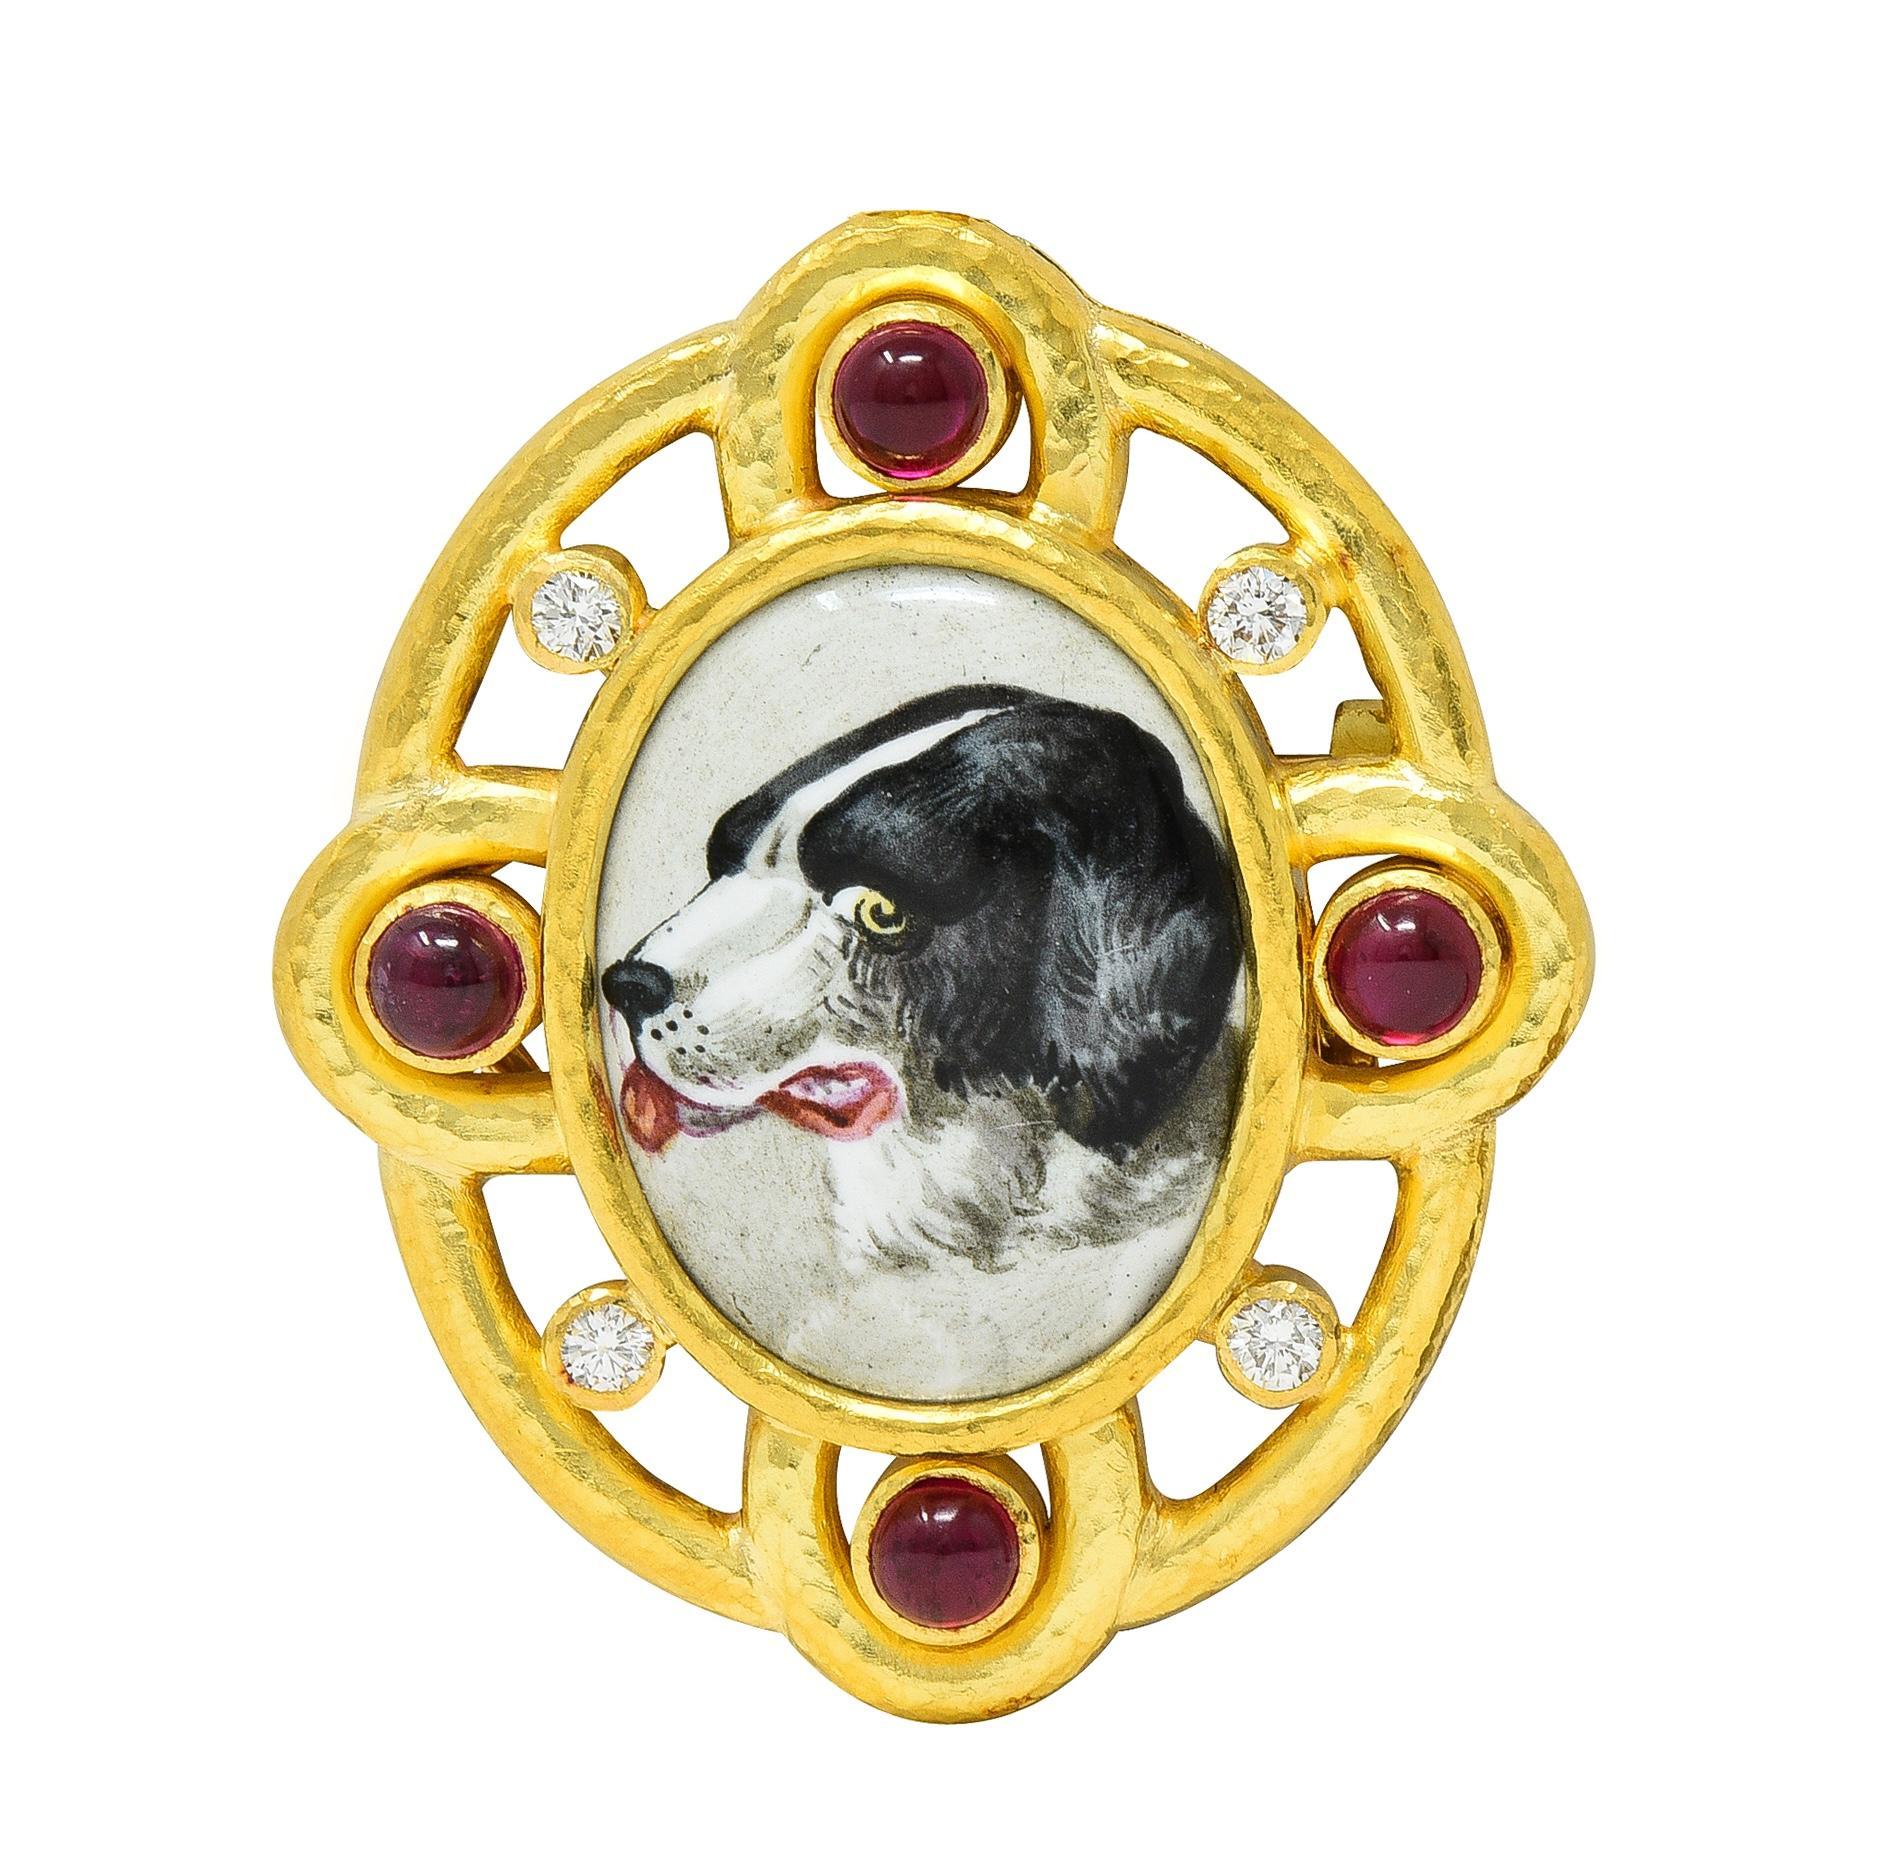 Centering an oval-shaped enamel portrait of a dog measuring 16.0 x 22.0 mm 
Opaque white, black, red, pink, and gray with gloss finish - no loss
Backed by white iridescent mother-of-pearl and bezel set
With a pierced radial surround and ruby